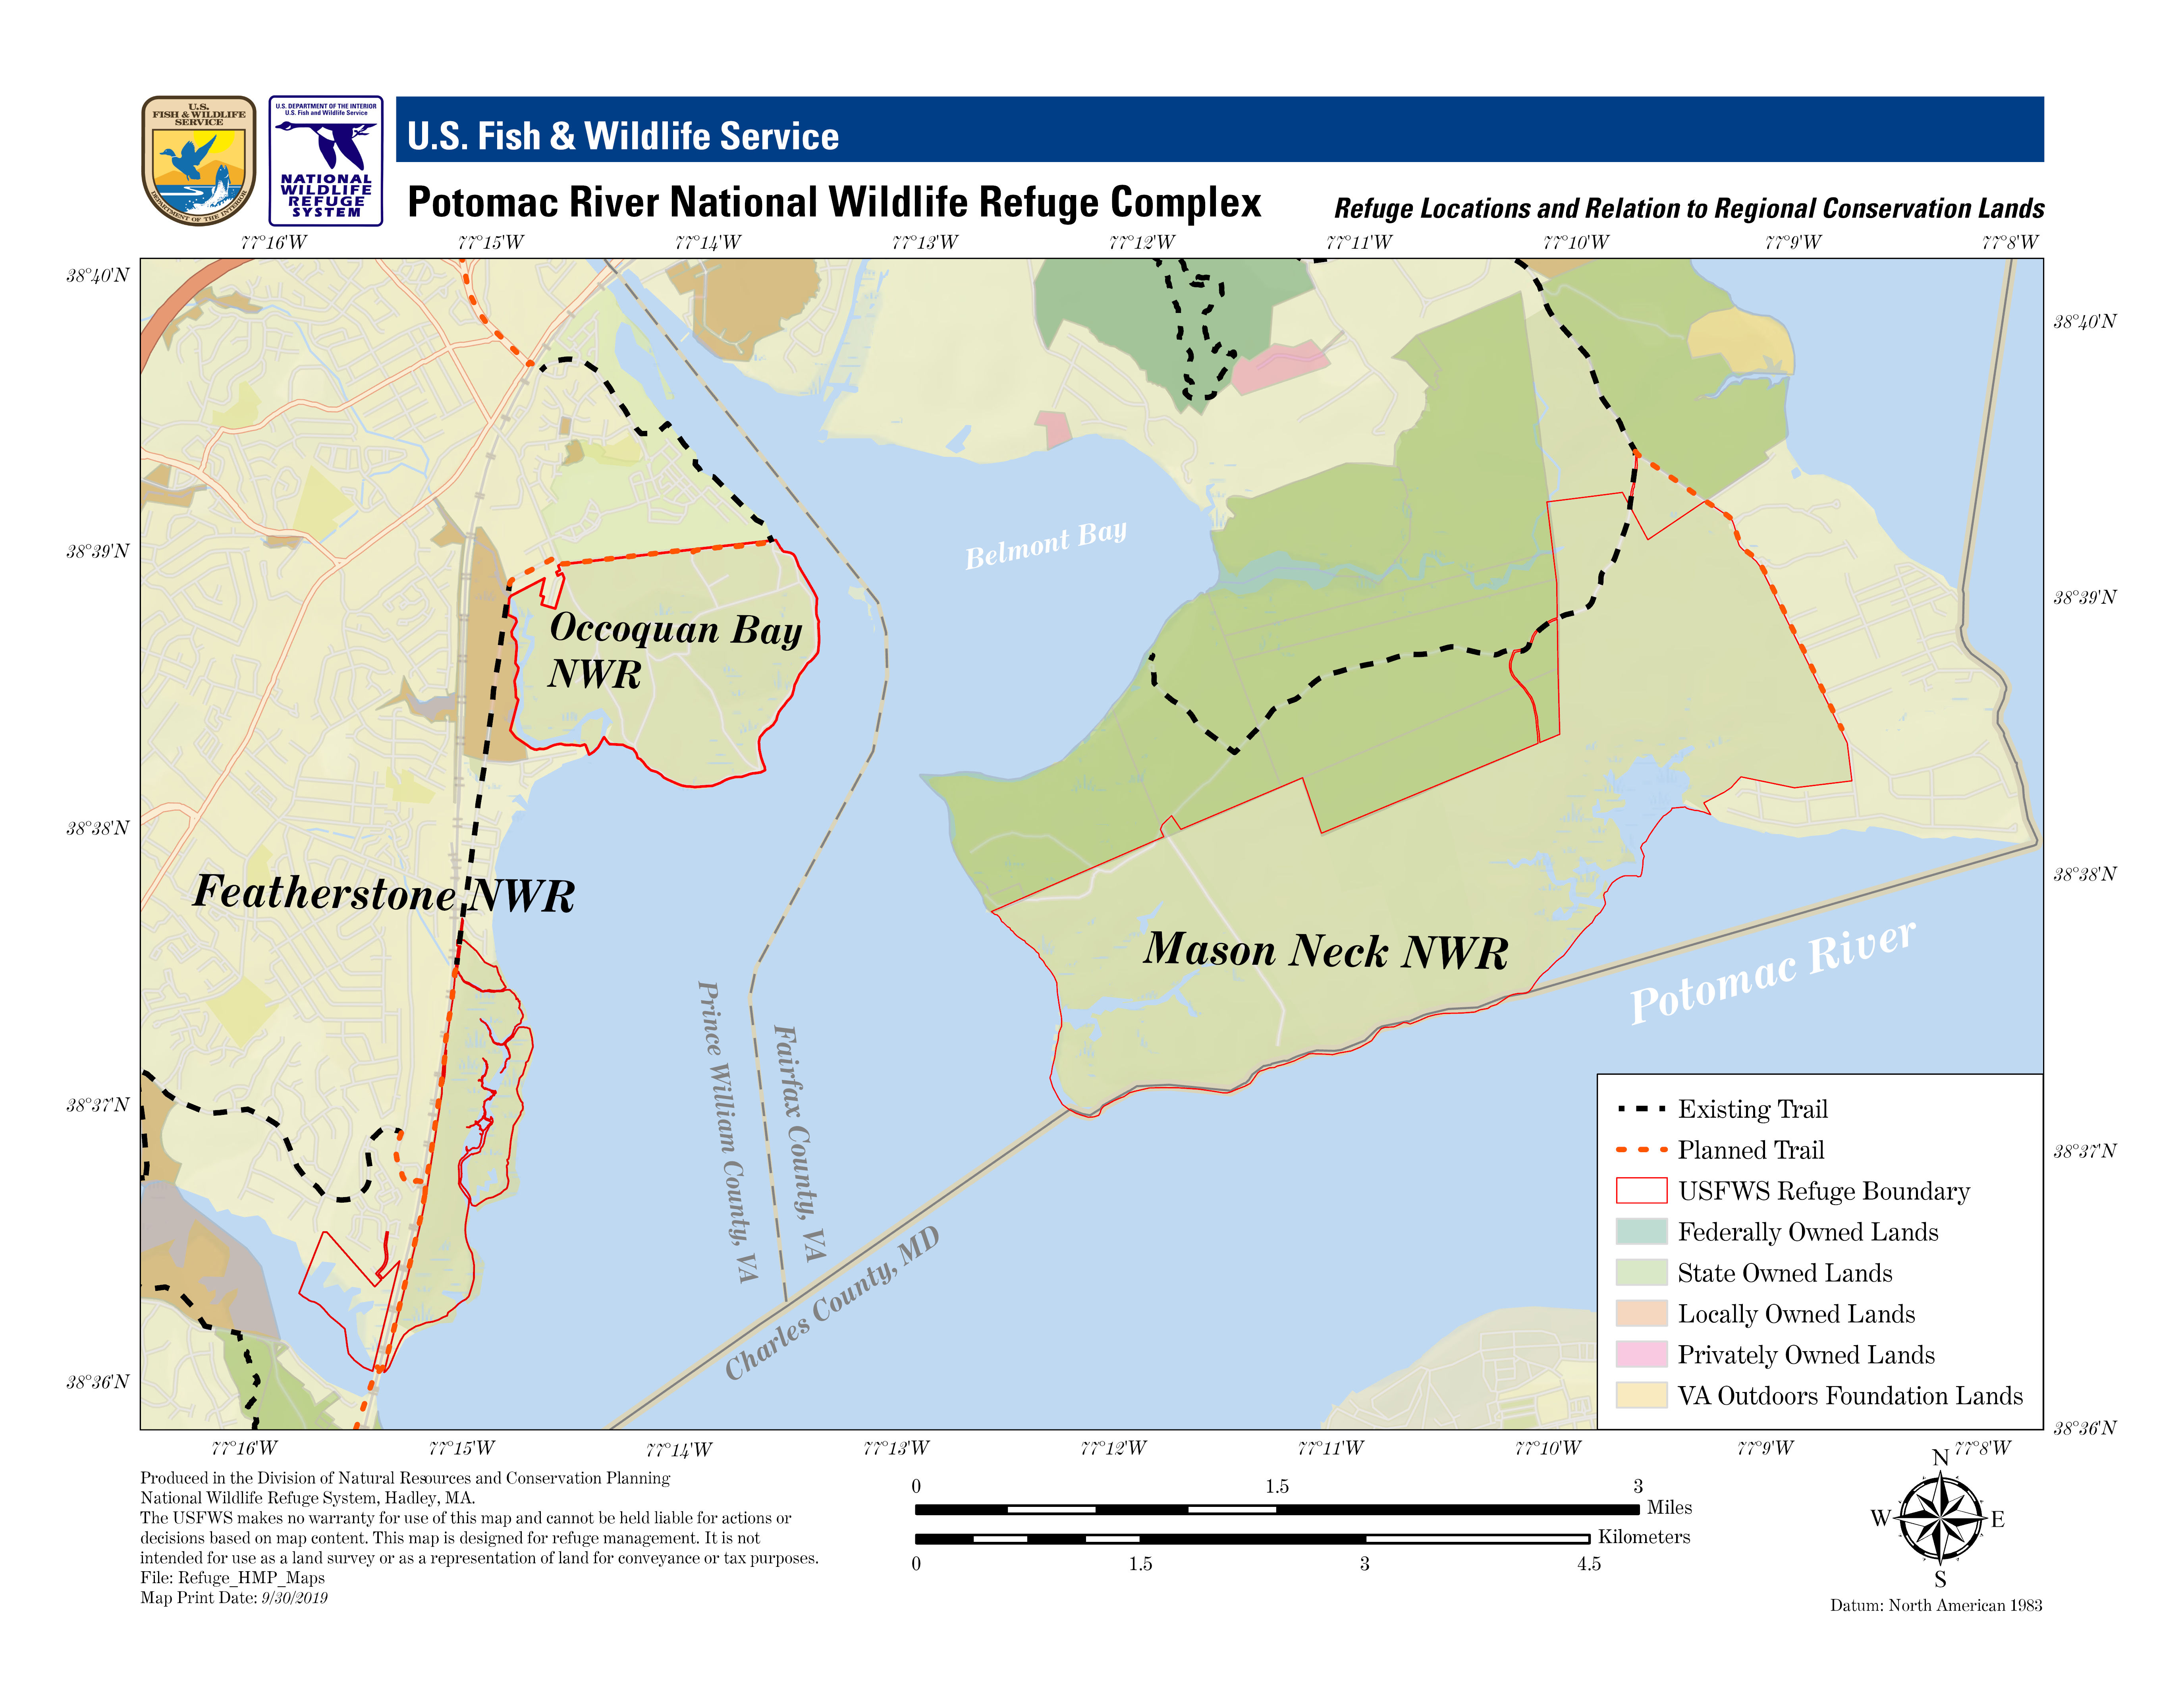 A map identifying all 3 refuges in the Potomac River NWRC